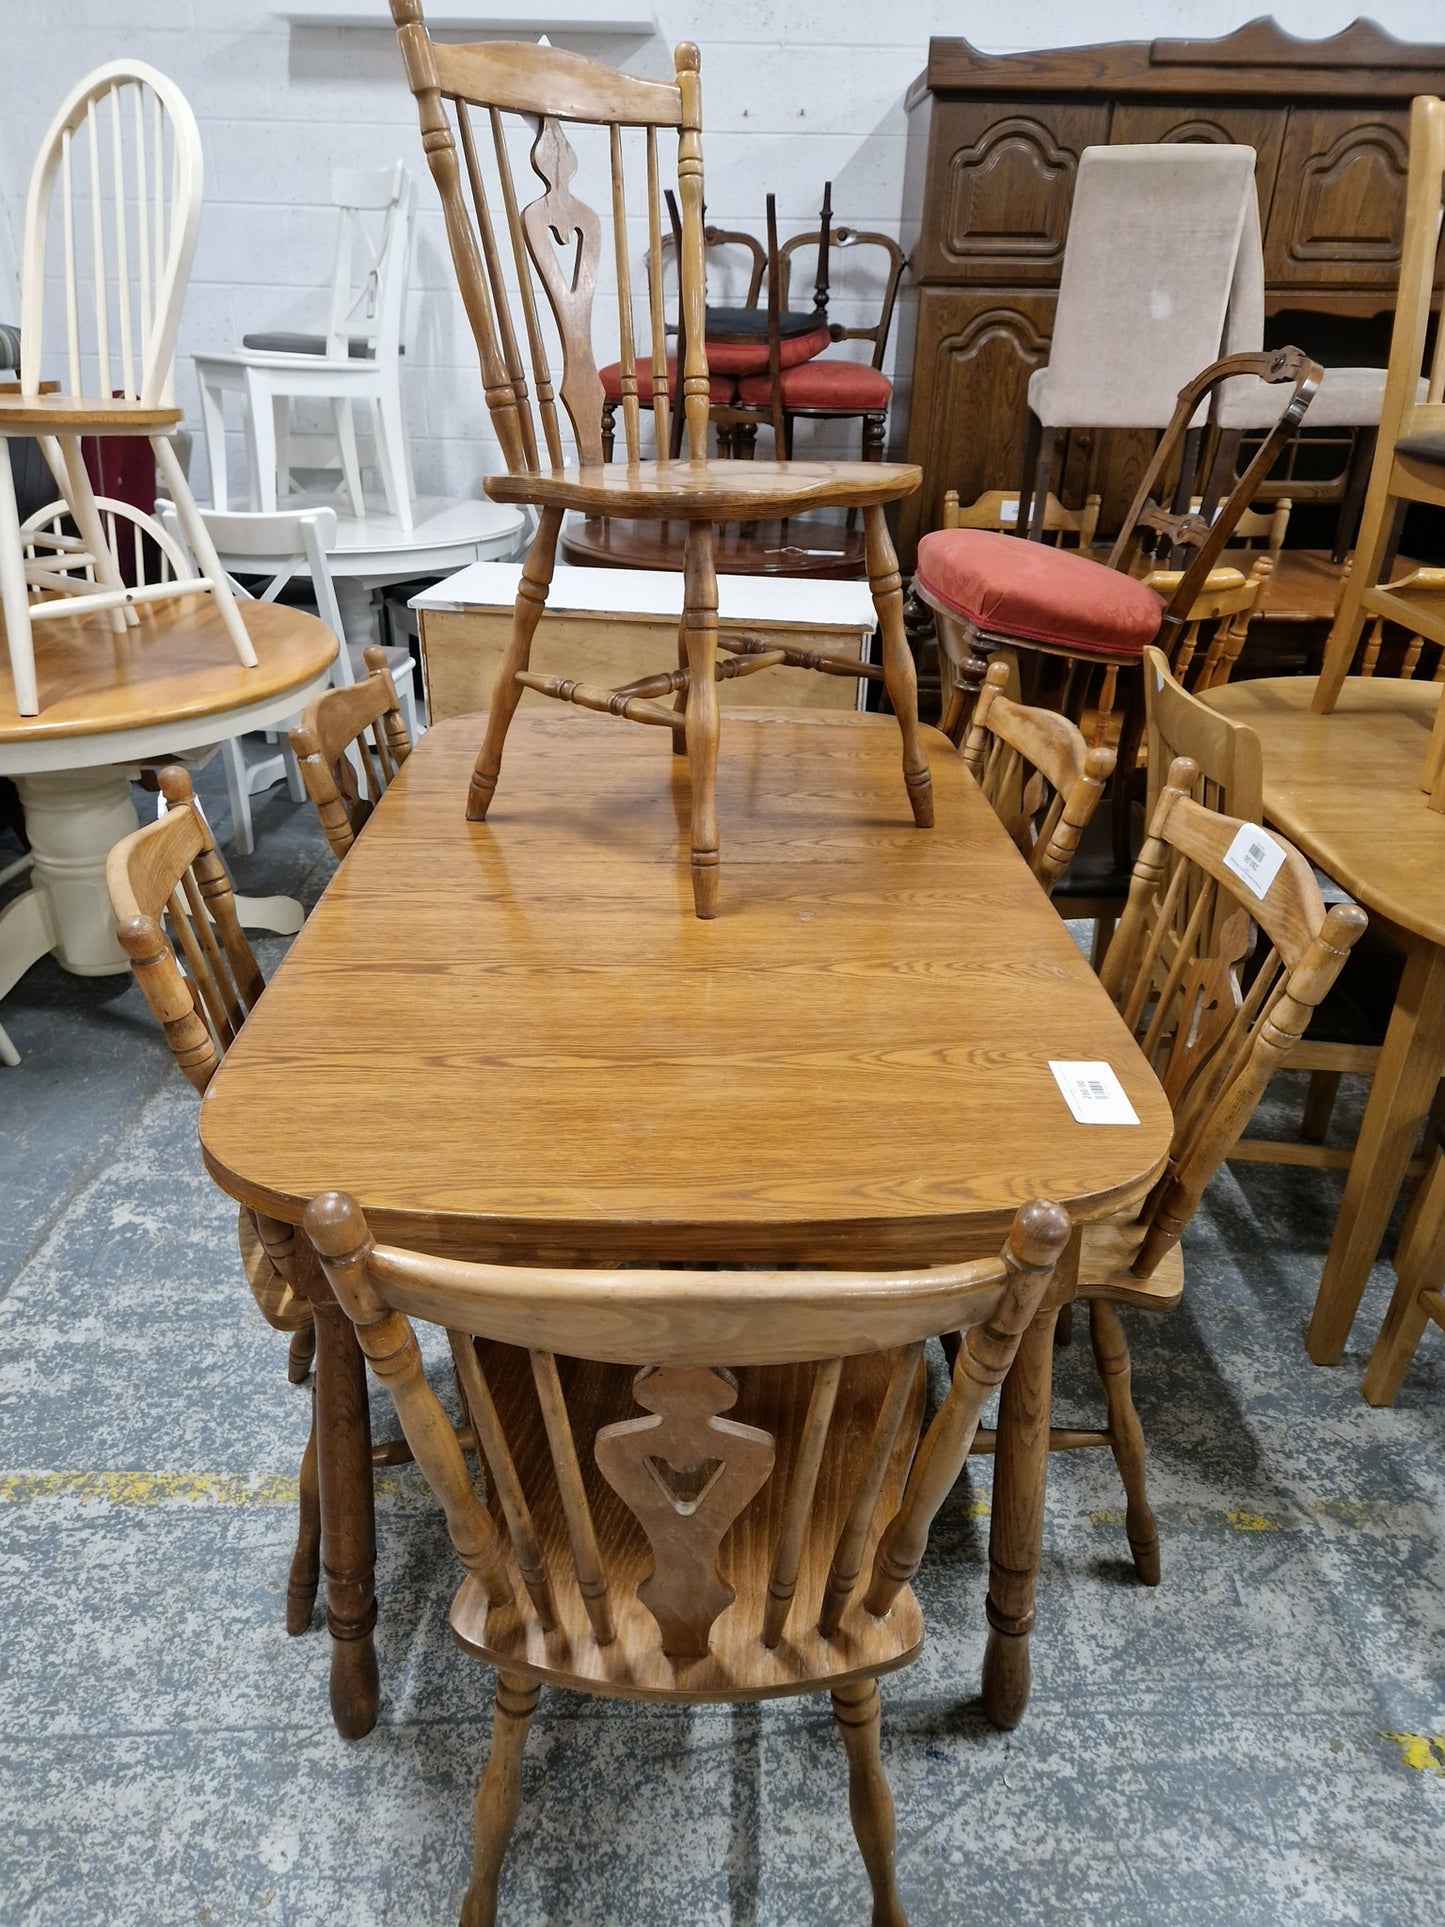 D End light wood kitchen table cw 6 no. matching chairs  Q3123